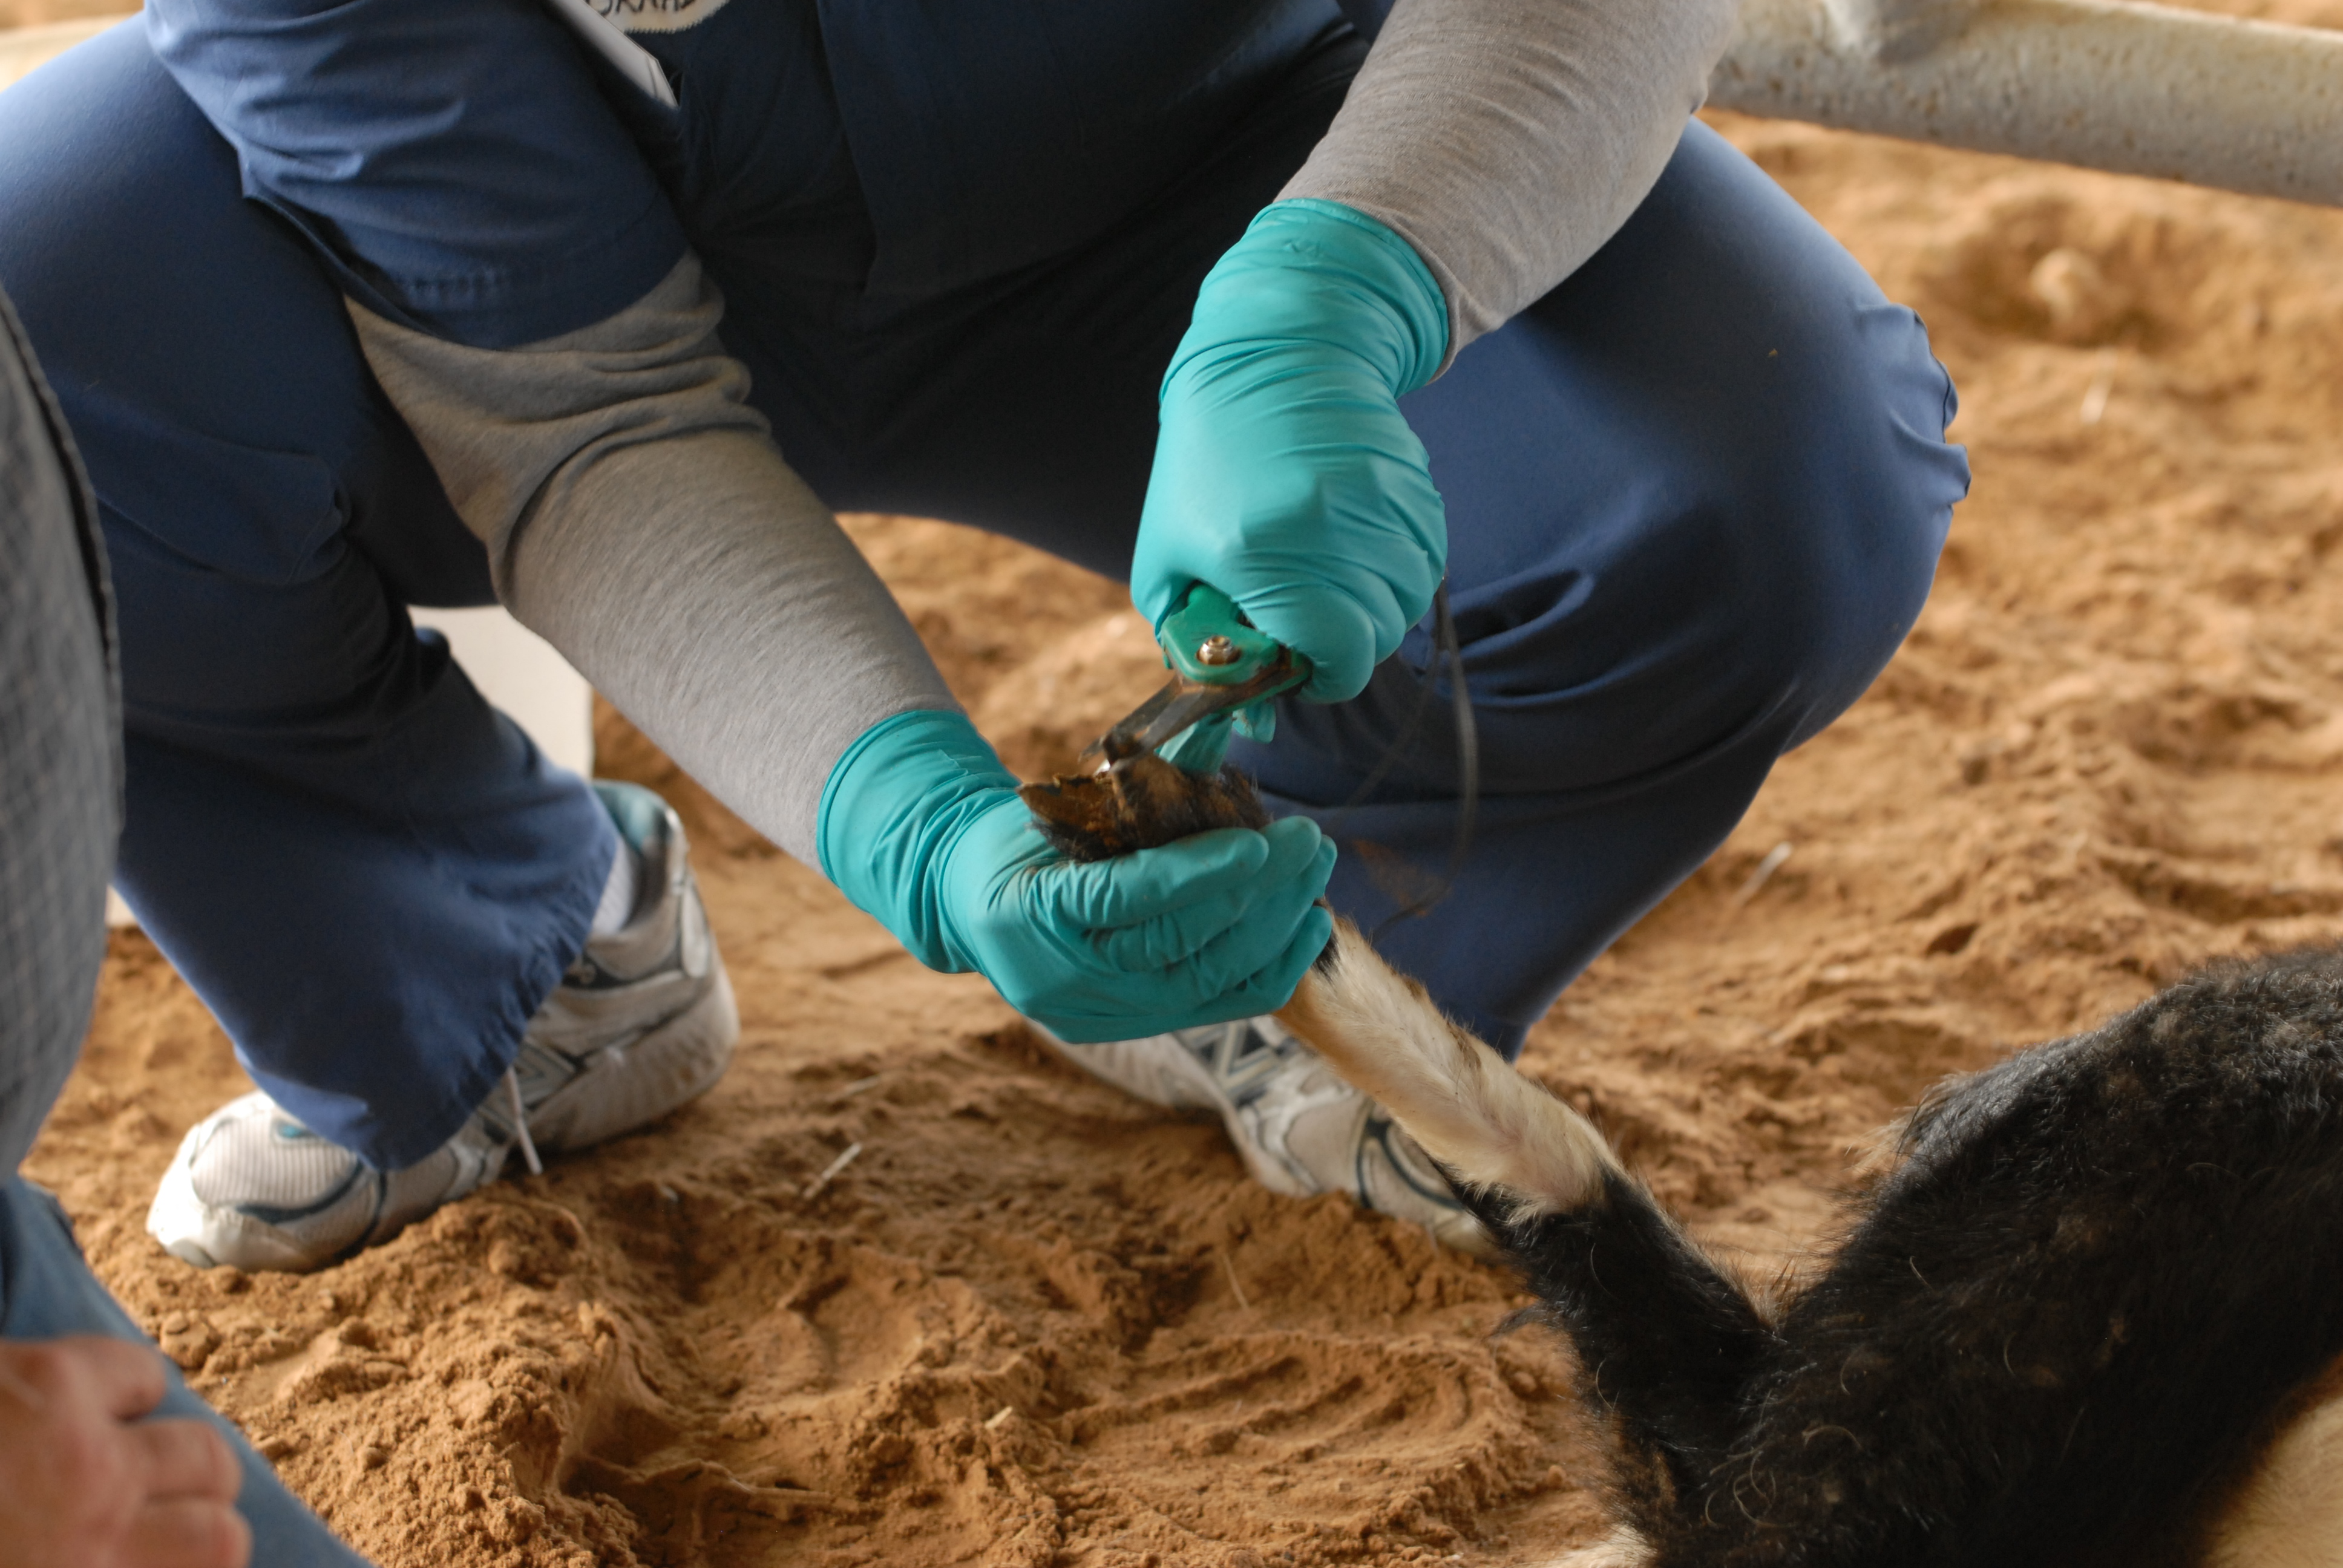 Sgt. 1st Class Nikisha Thornhill provides a goat with a manicure during the Civil Affairs Medical Sergeants course.  Ten Medically trained Soldiers assigned to the 85th Civil Affairs Brigade are participating in the Civil Affairs Medical Sergeants Course held at the Veterinarian Medical Park Department at the Texas A&M University. These animals used are managed under the Independent Protection Rehabilitation Program, which is a Department of Defense managed program used to provide animals for students as training aides. The university partners with the U.S. Army Medical Center and School at Fort Sam Houston to provide critical Civil Affairs training for these future senior medics assigned to 4 person civil affair teams.  After completion from the course, they will be expected to perform a wide variety of duties from food hygiene to vet care, and dentistry within austere environments while. (Photo by Maj. Bryan Woods, 85th Civil Affairs Brigade Public Affairs)